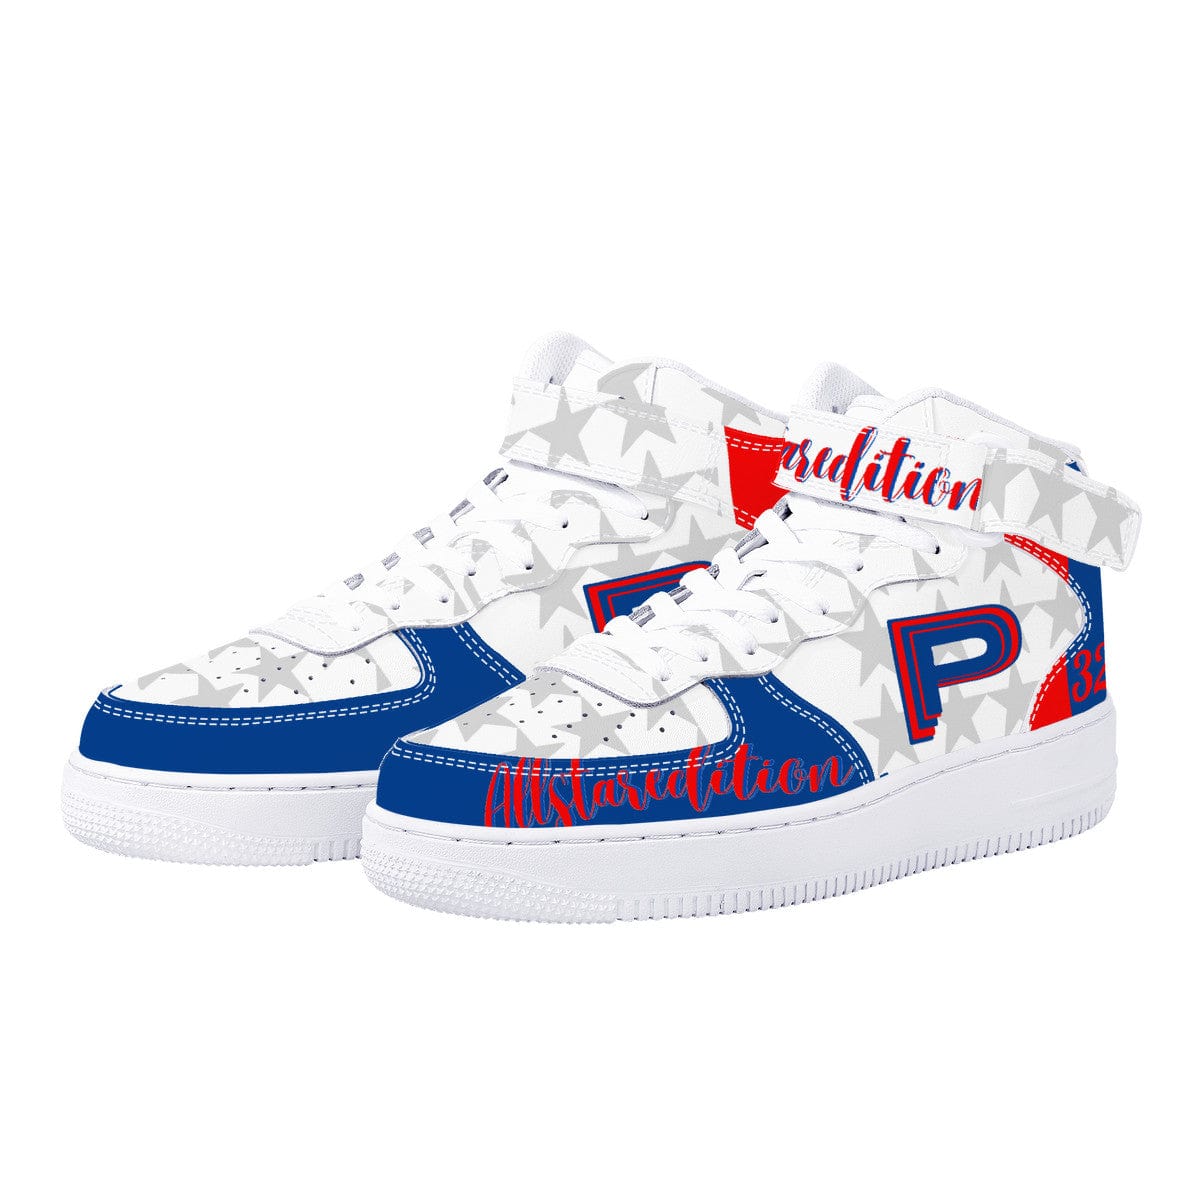 sneaker Courtside 32 classic all star edition shoes